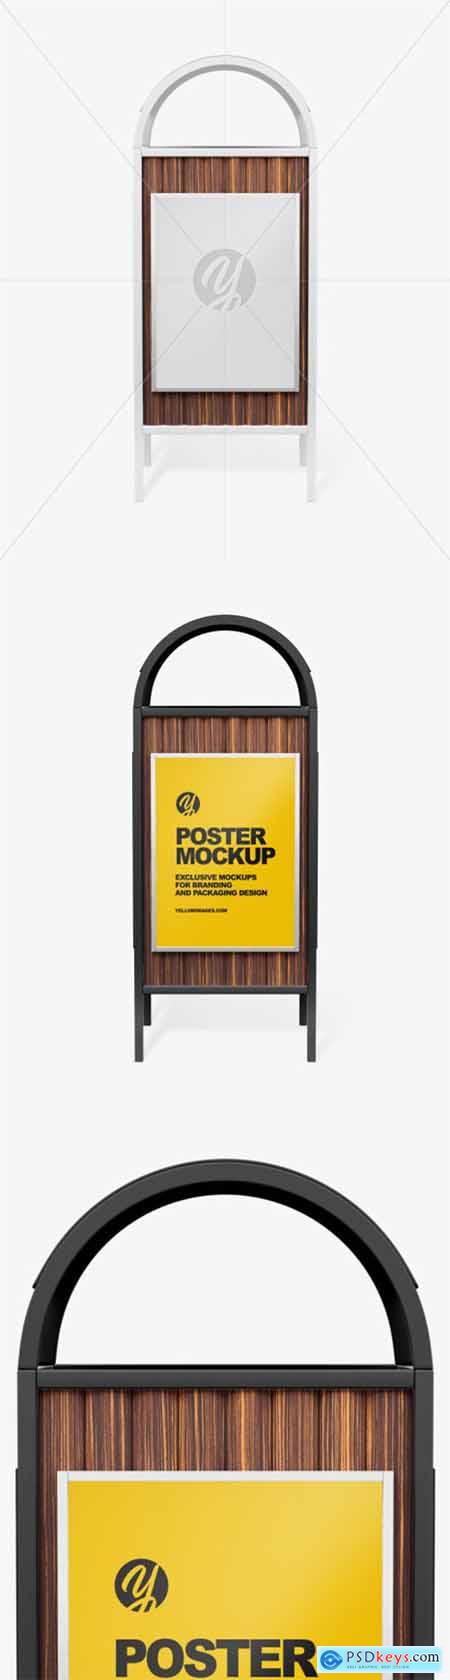 Rubbish Bin with Poster Mockup - Front View 54786